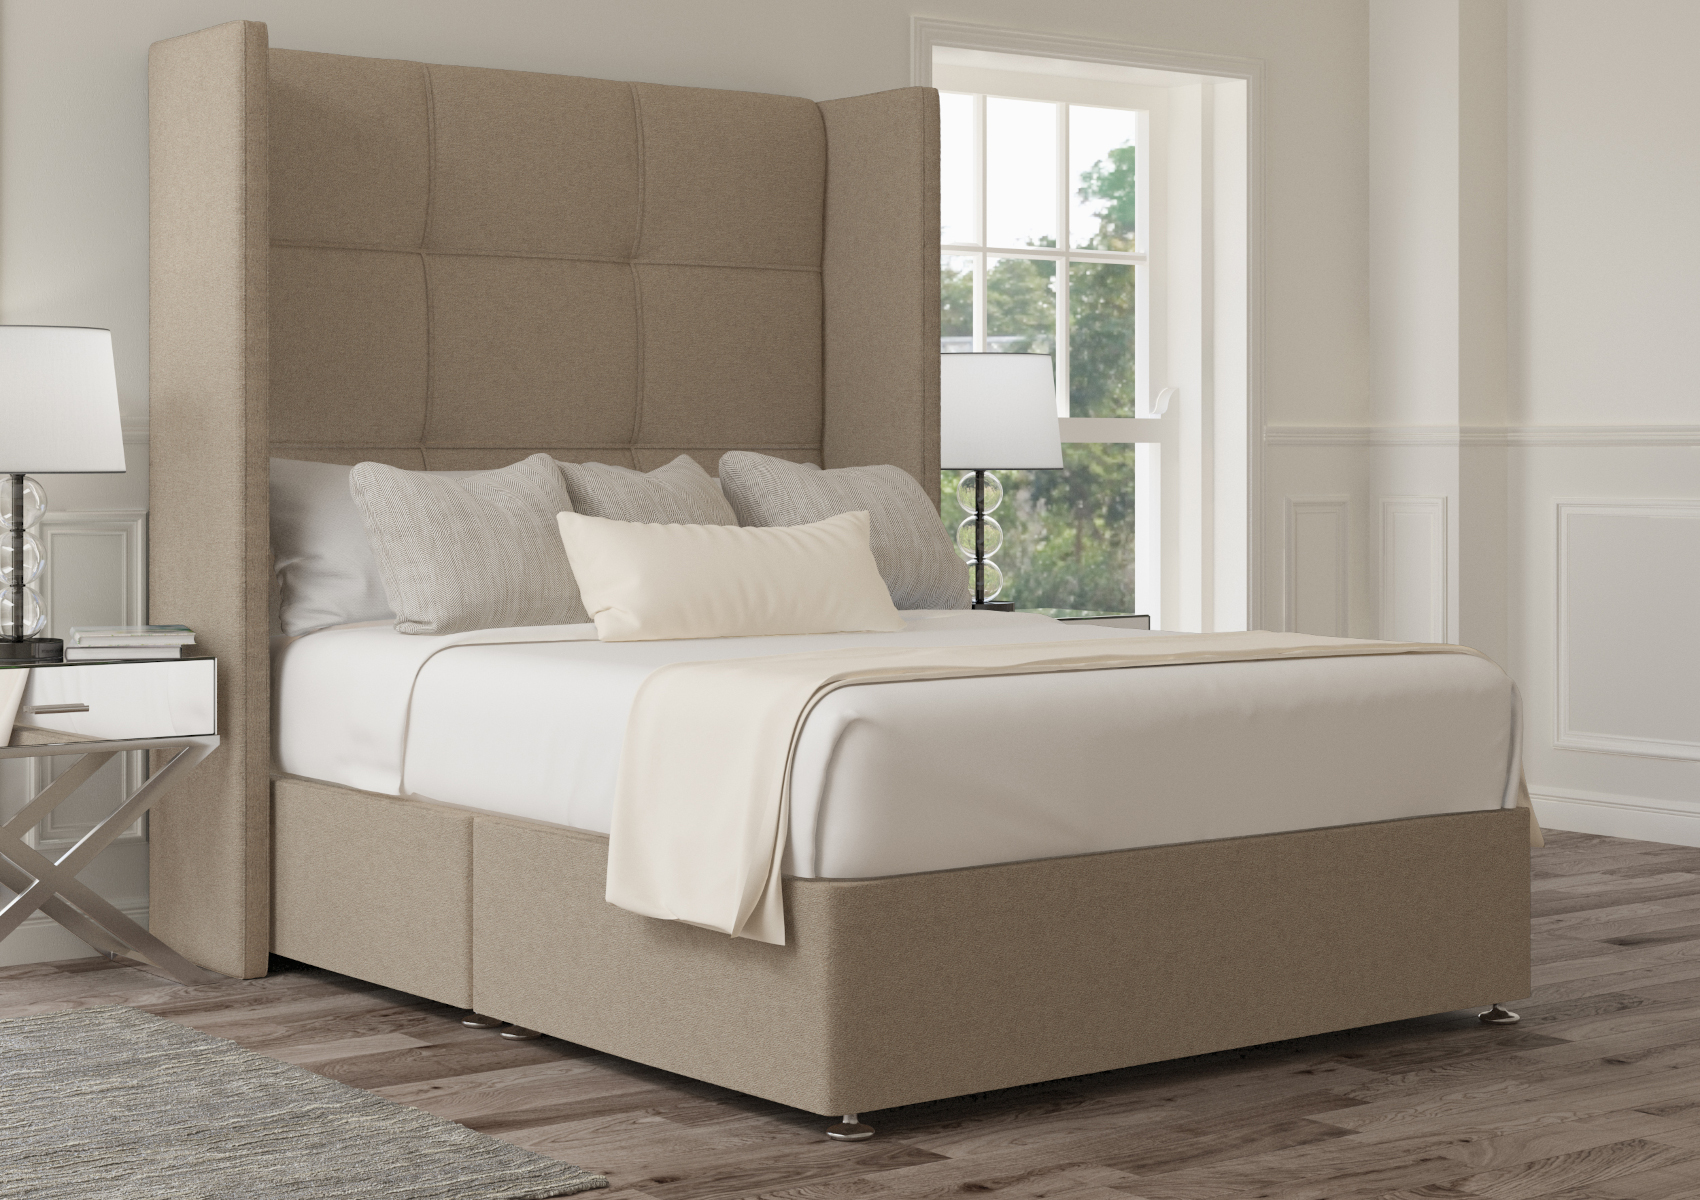 View Oaklyn Trebla Stone Upholstered Double Winged Bed Time4Sleep information